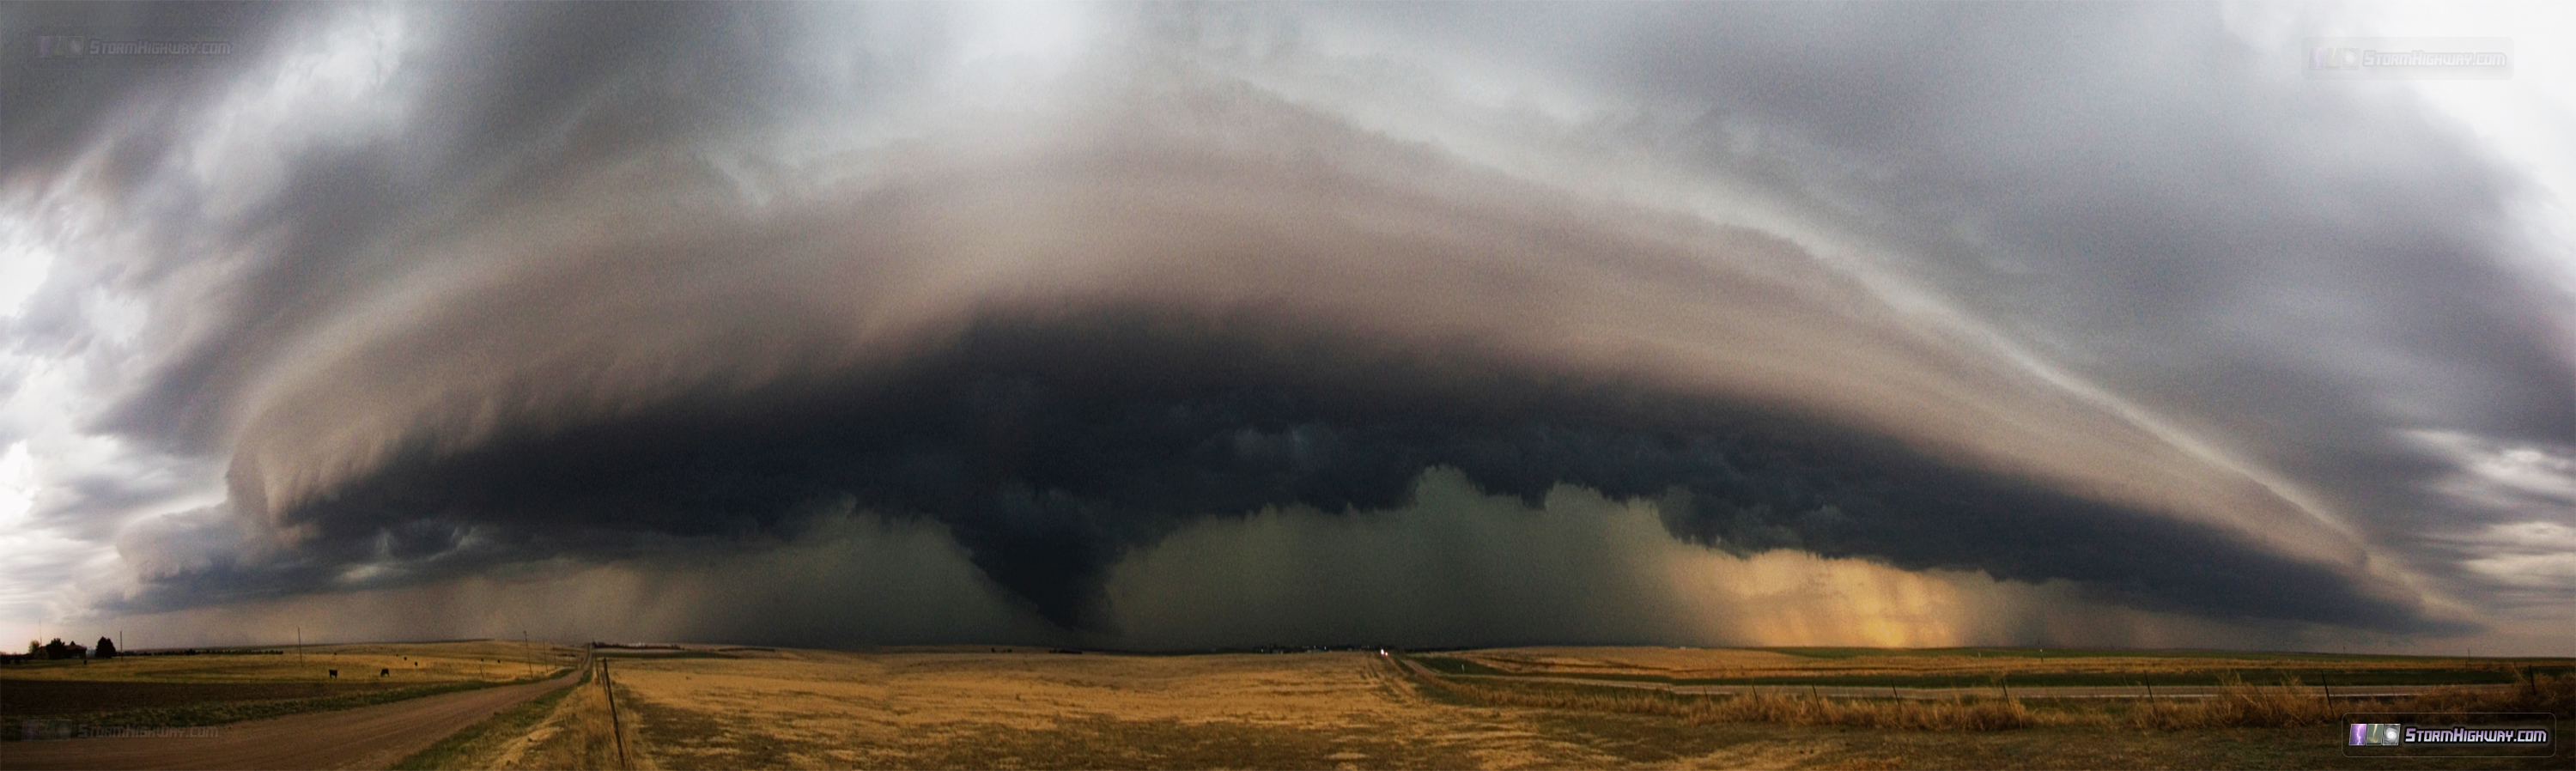 Severe squall line, Cheyenne Wells, CO - May 22, 2014